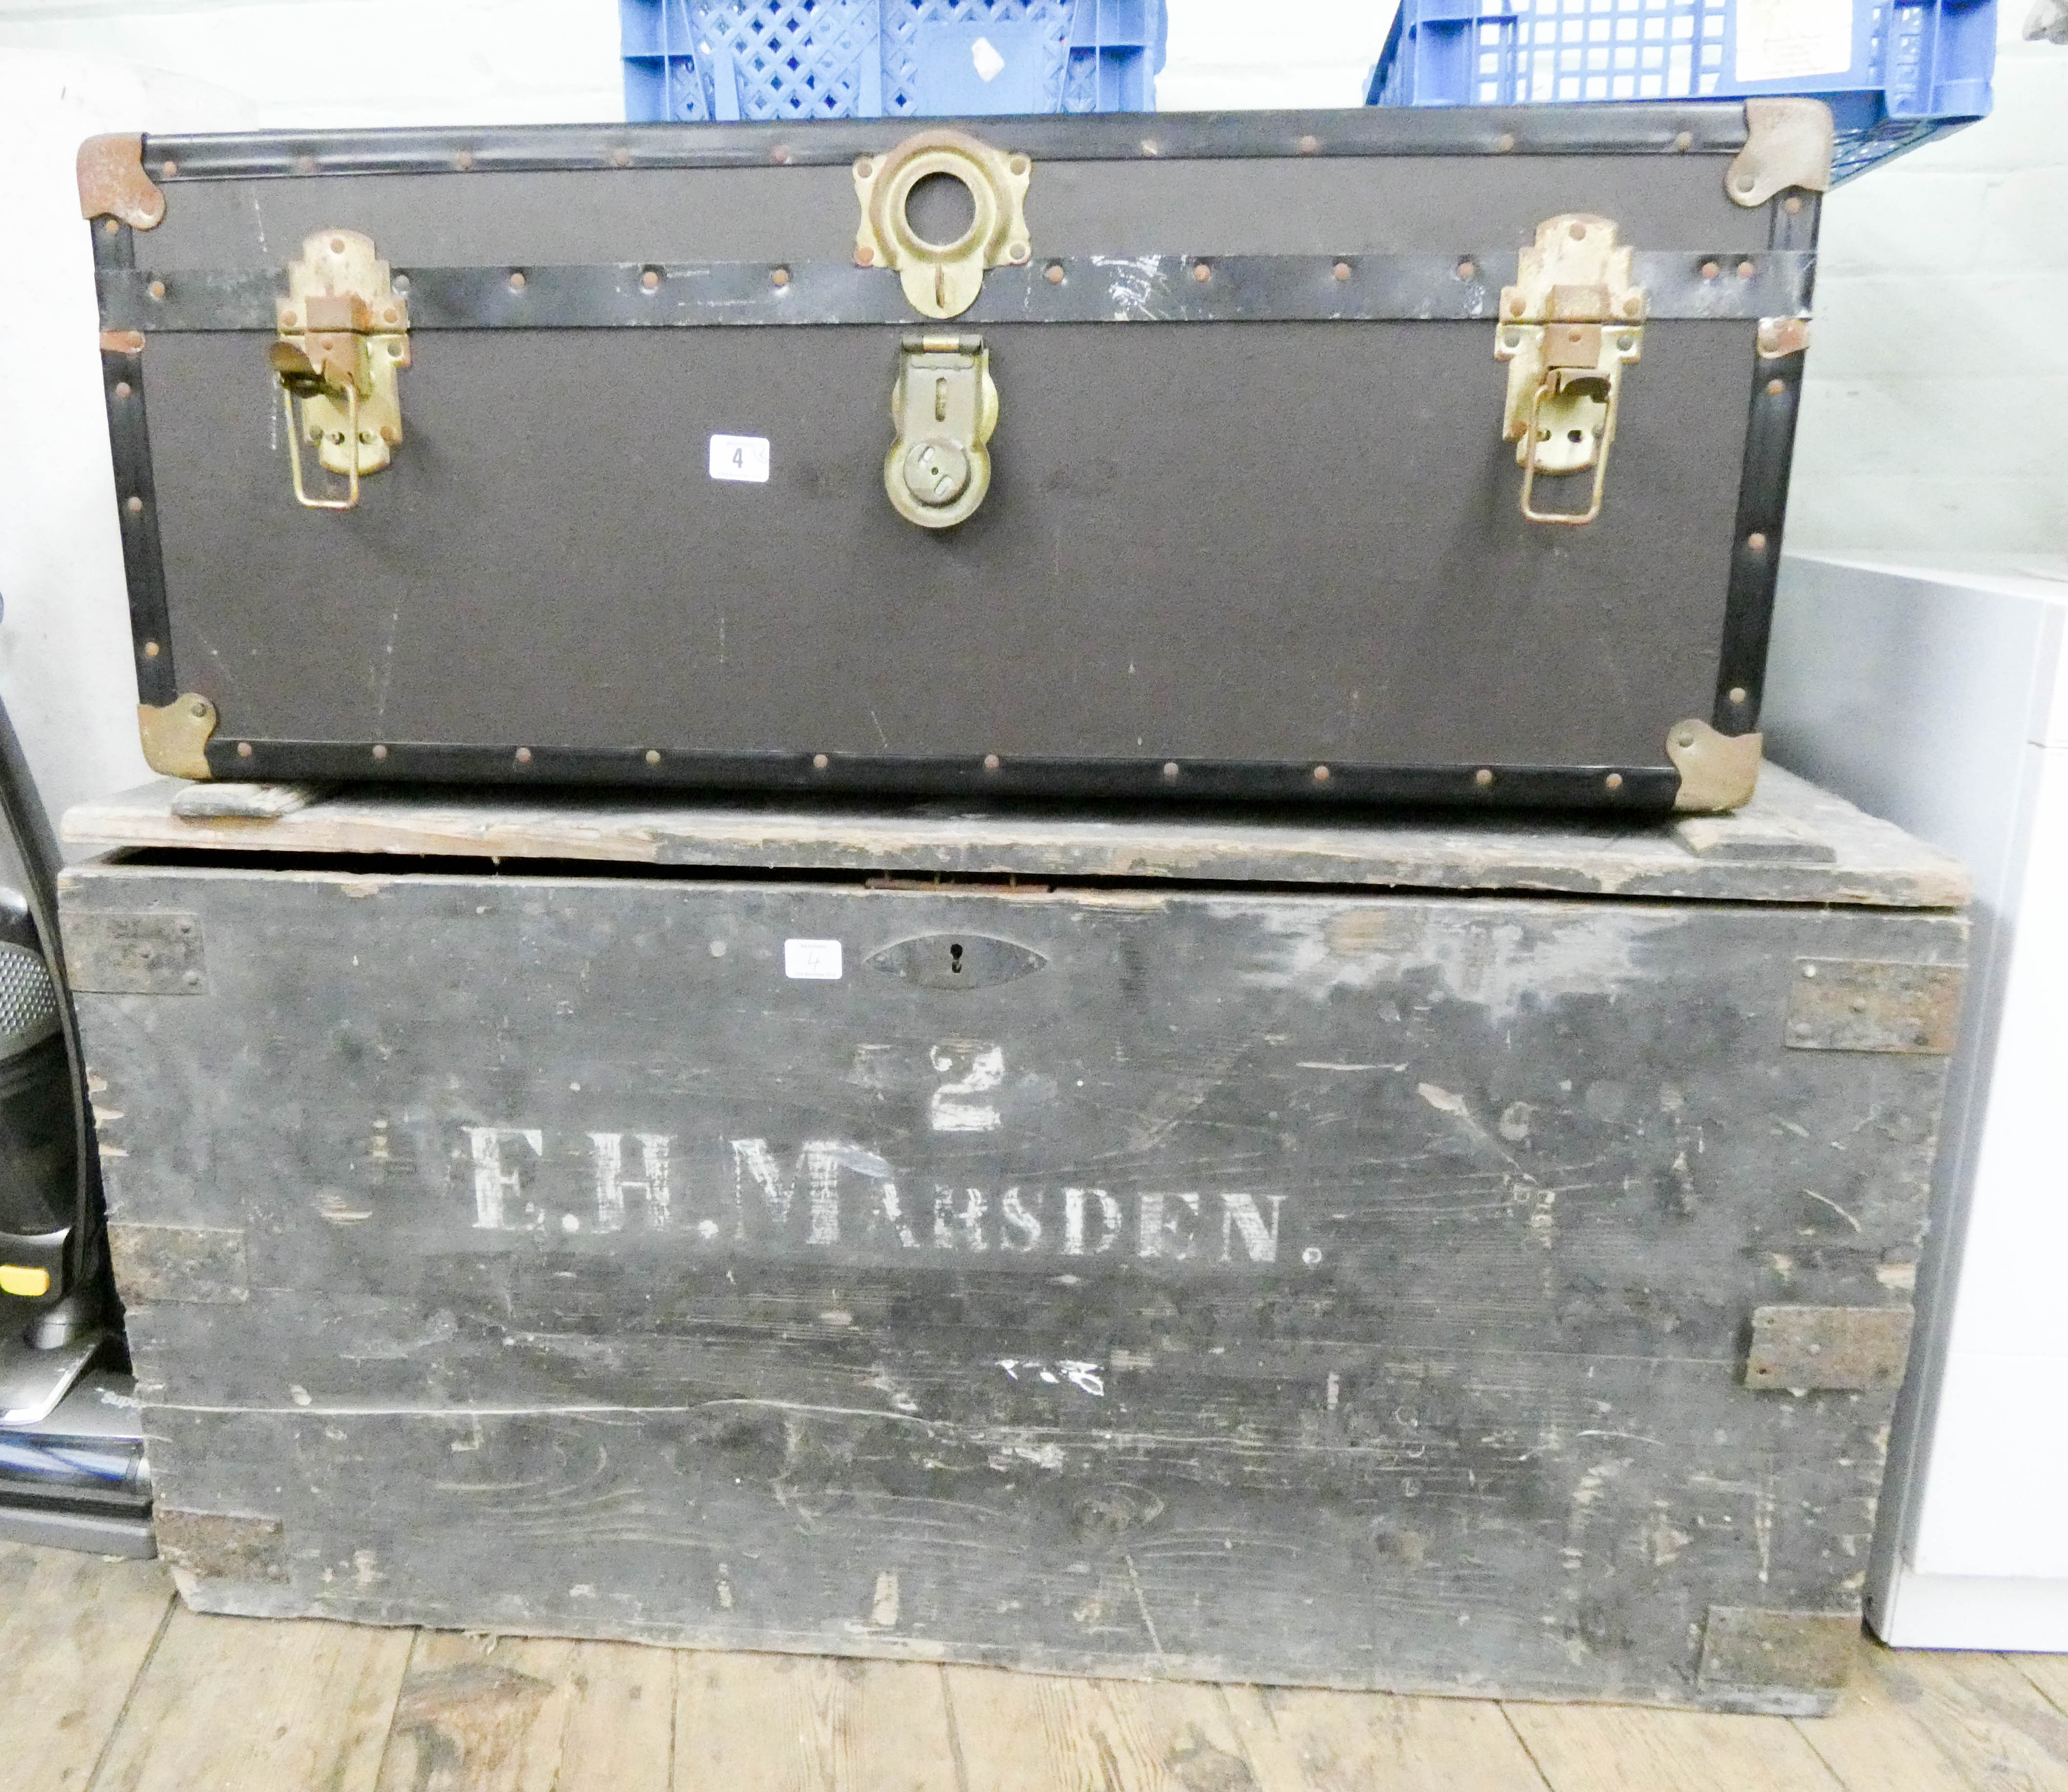 A large old wooden trunk and one other trunk